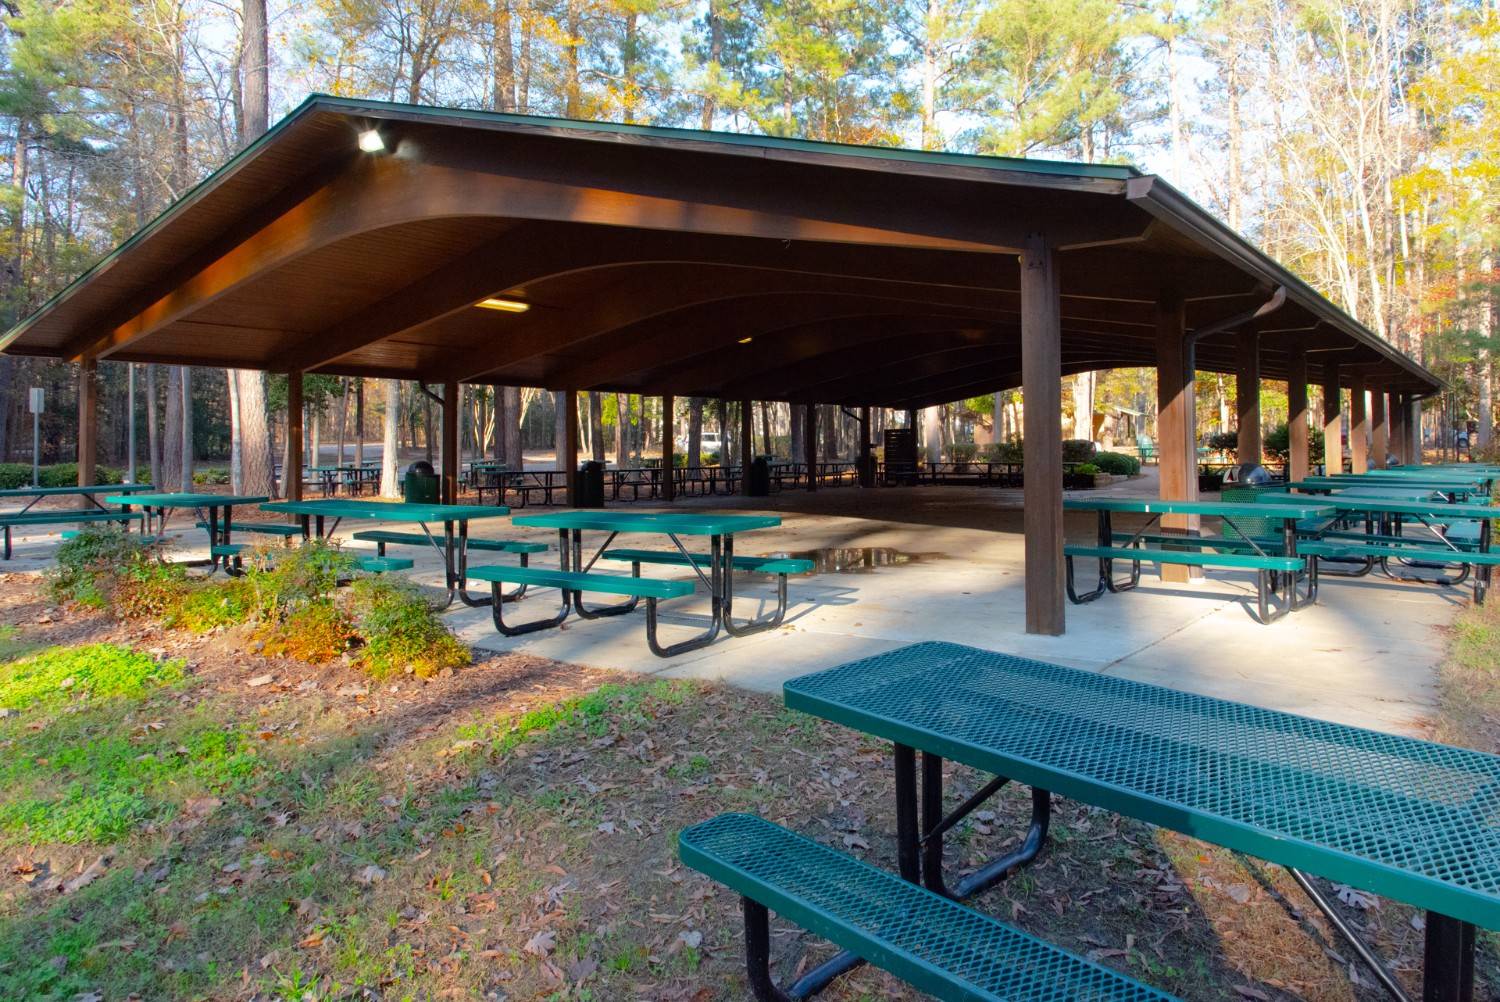 Rotary Shelter at Ritter Park (250)